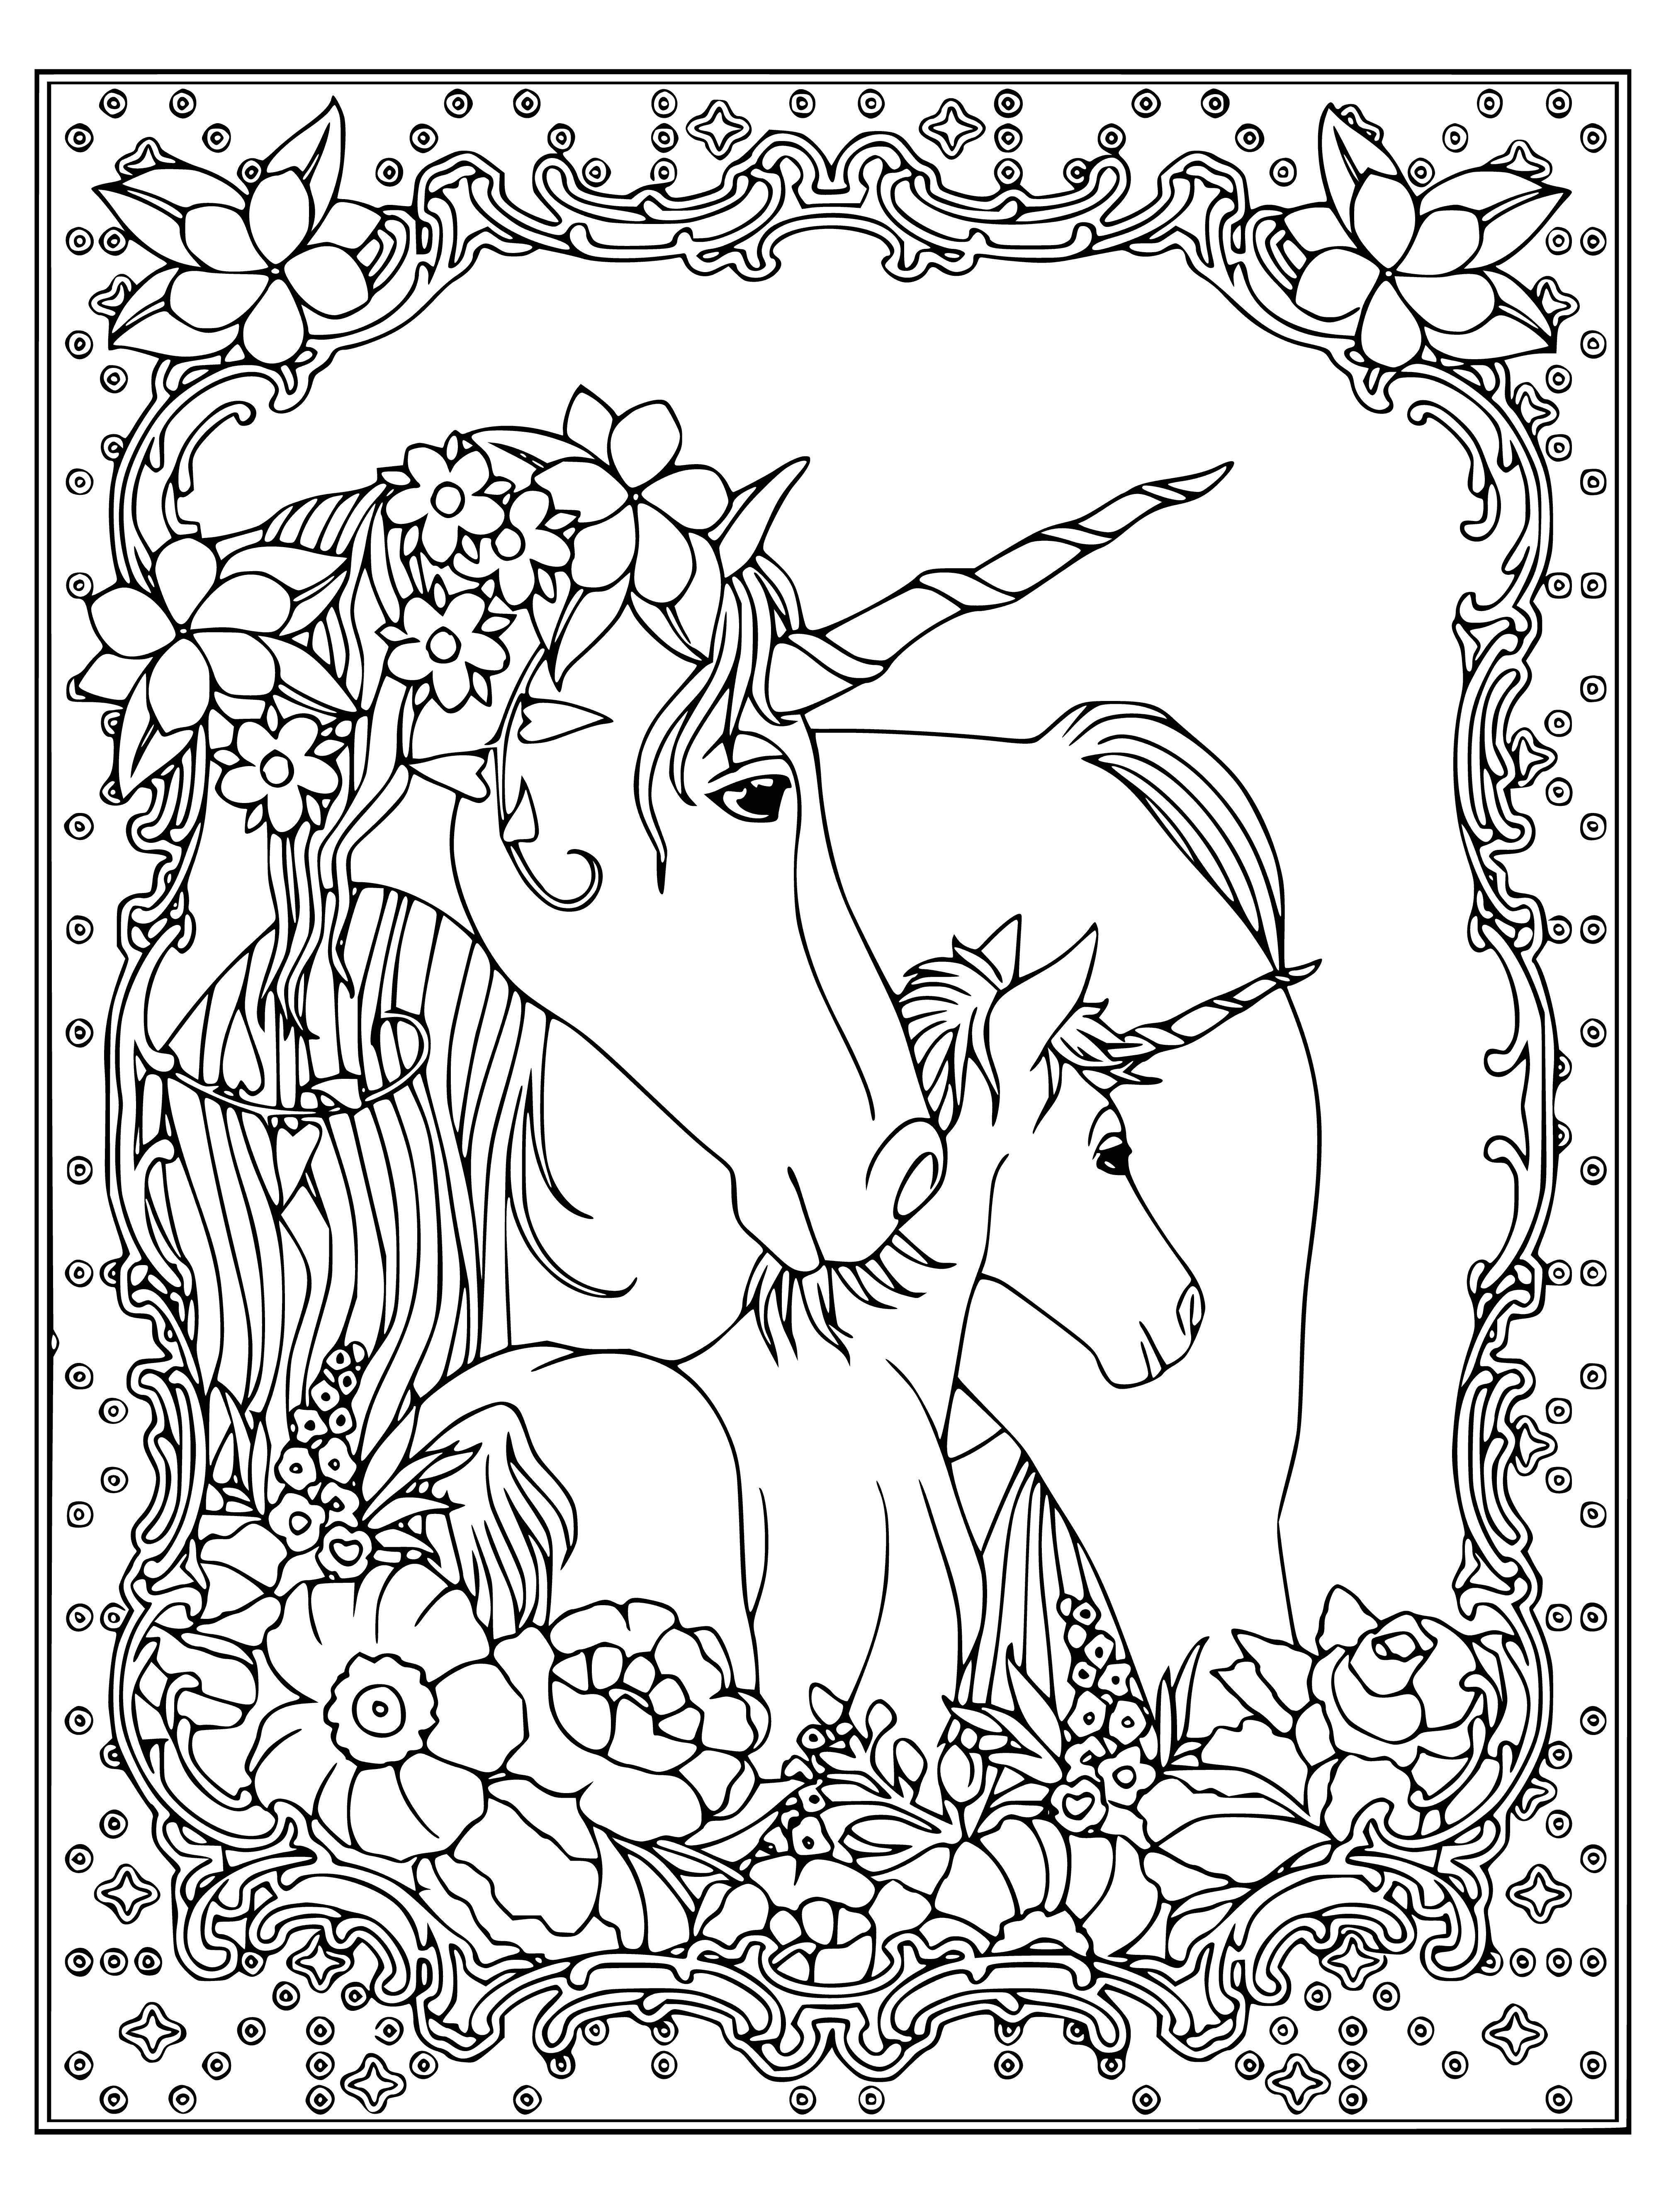 Pair of unicorns coloring page